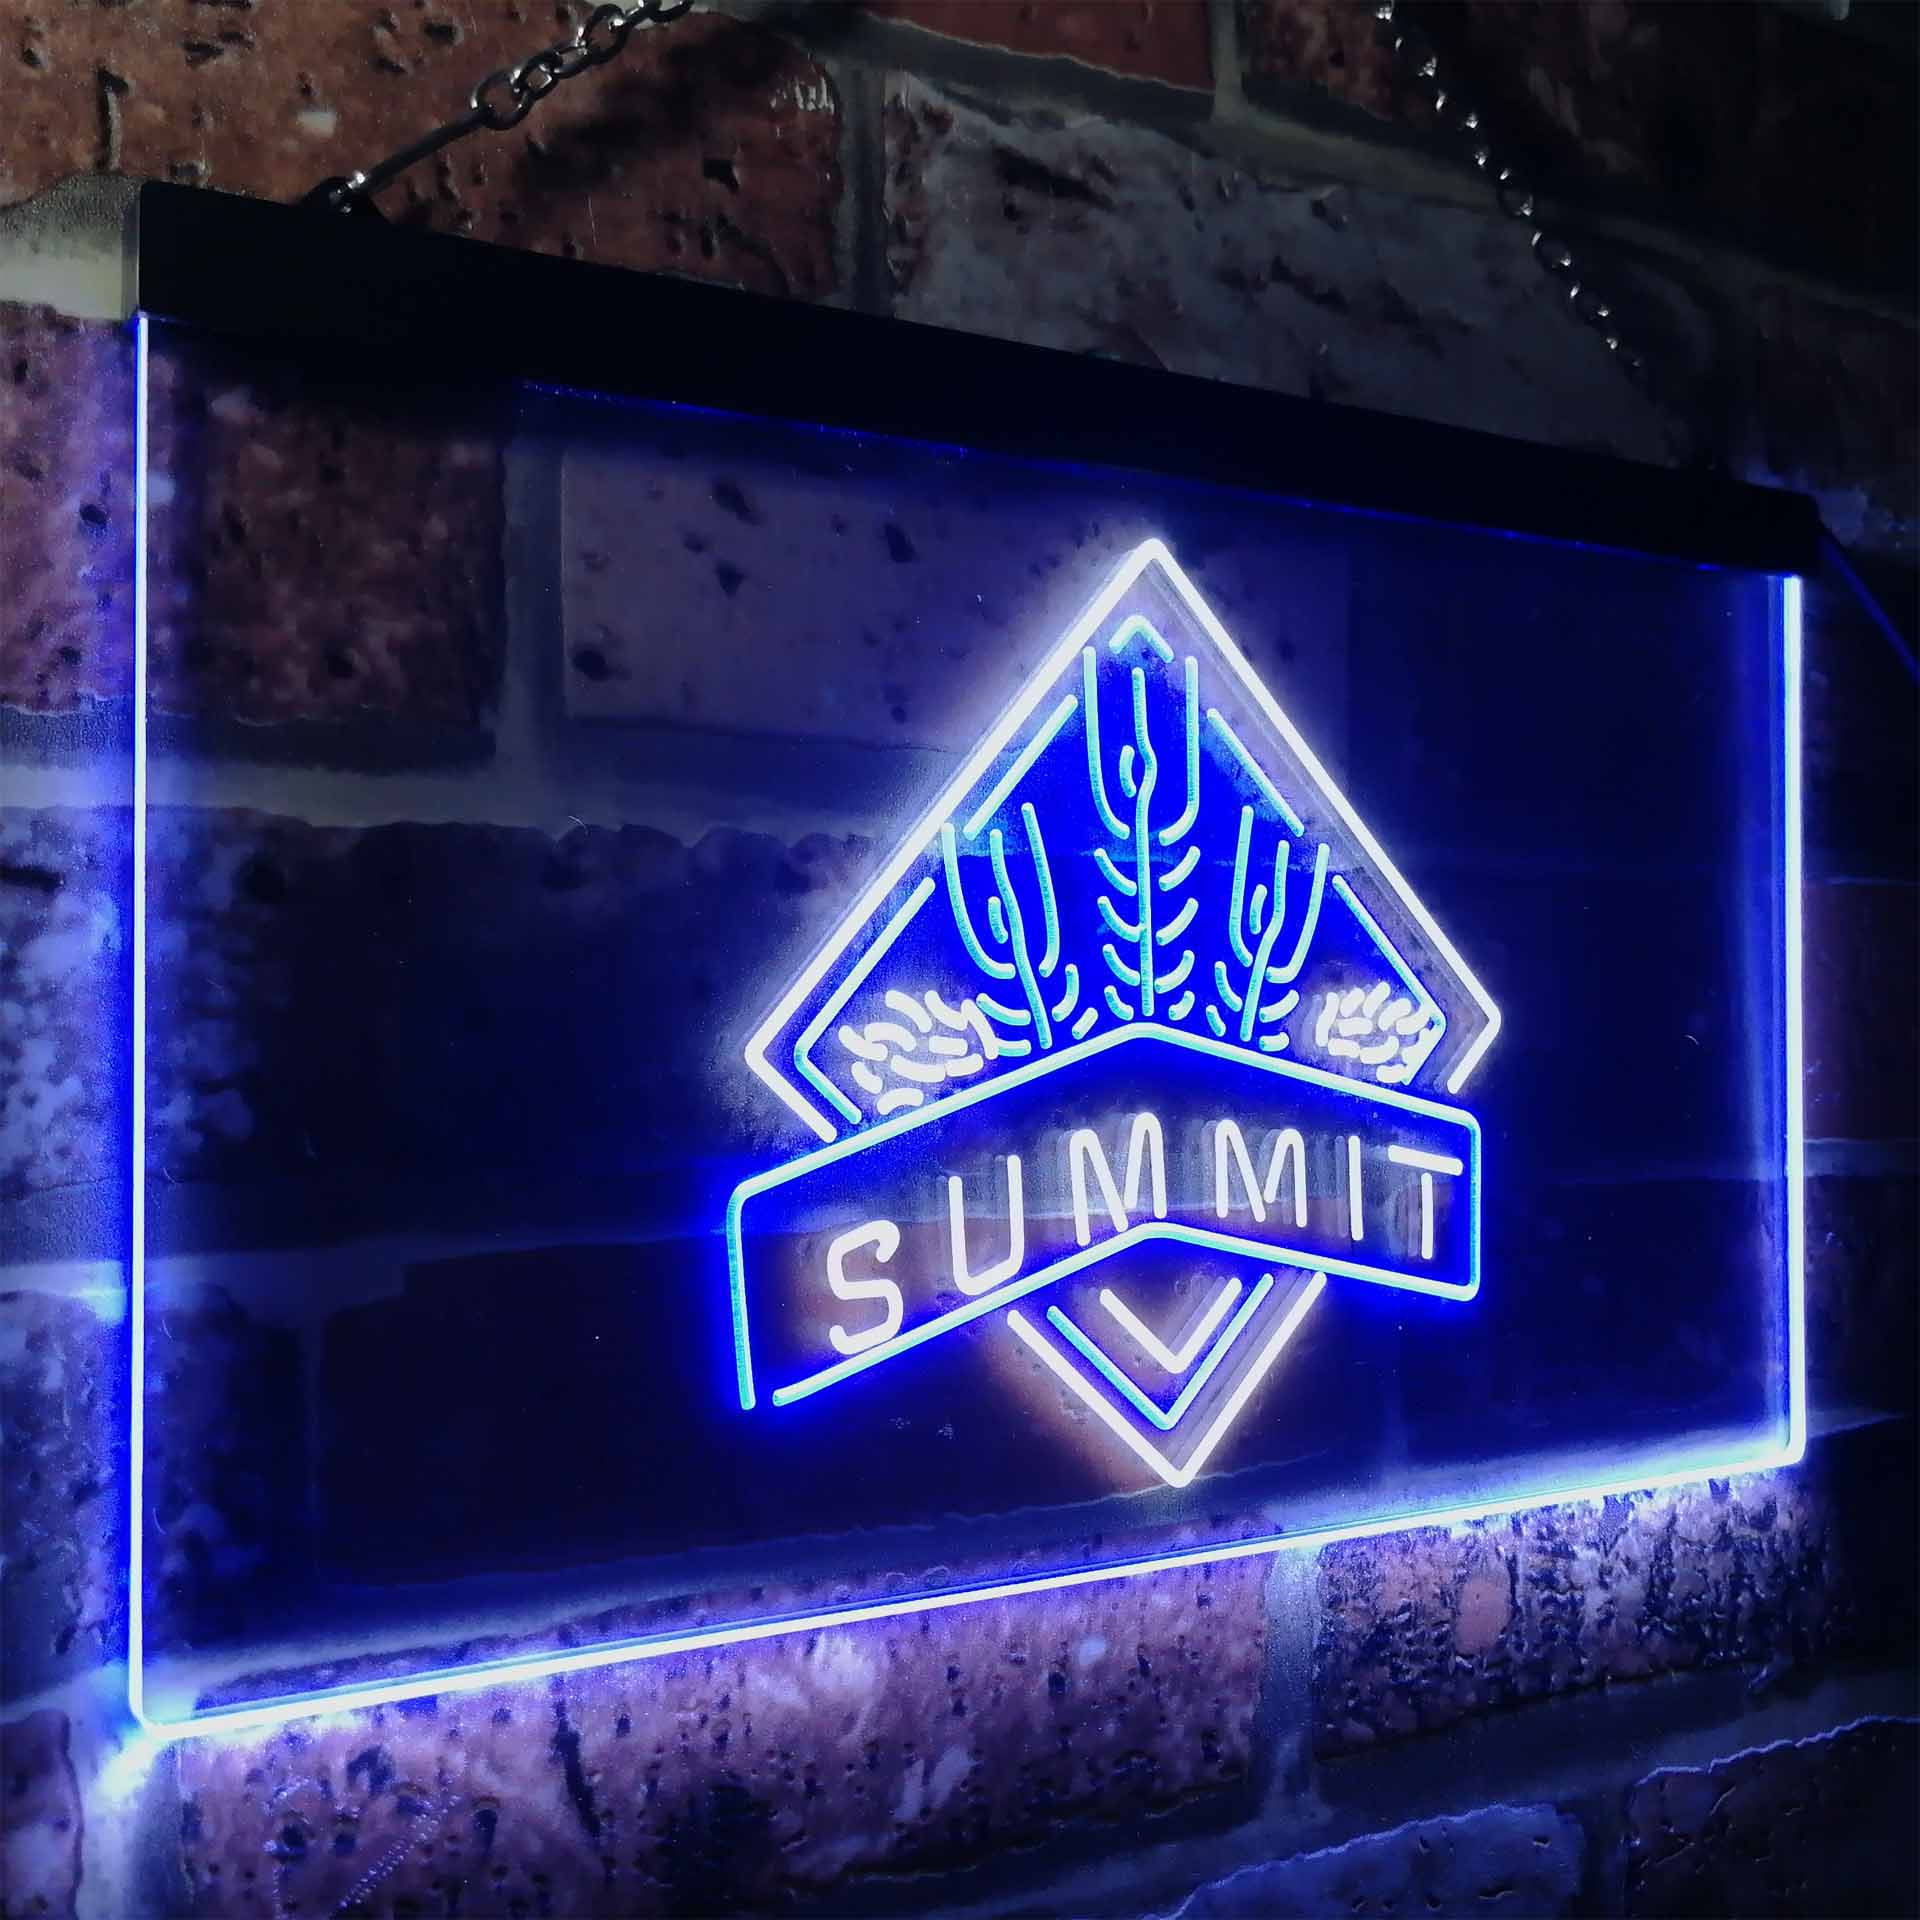 Summit Brewing Co Neon LED Sign